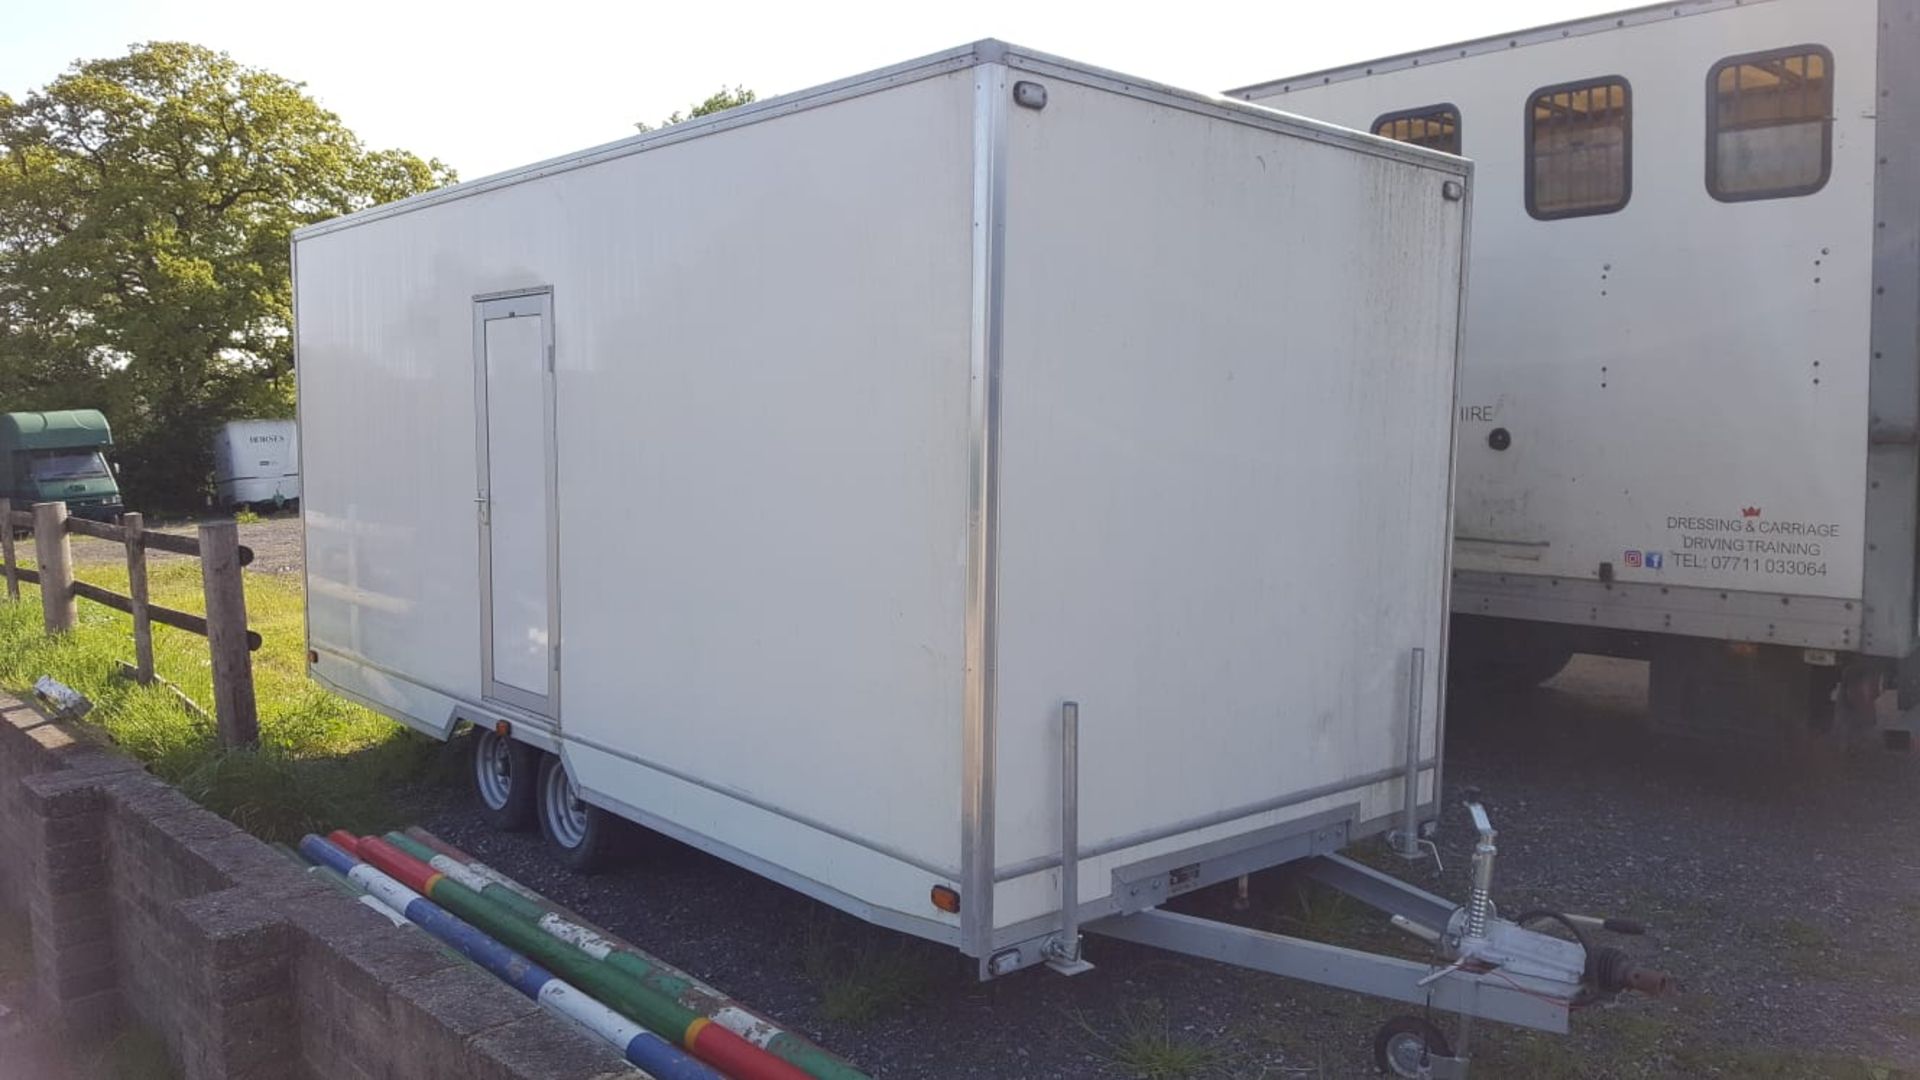 Green Pod Company mobile hospitality male and female trailer toilet block, White modern exteriors